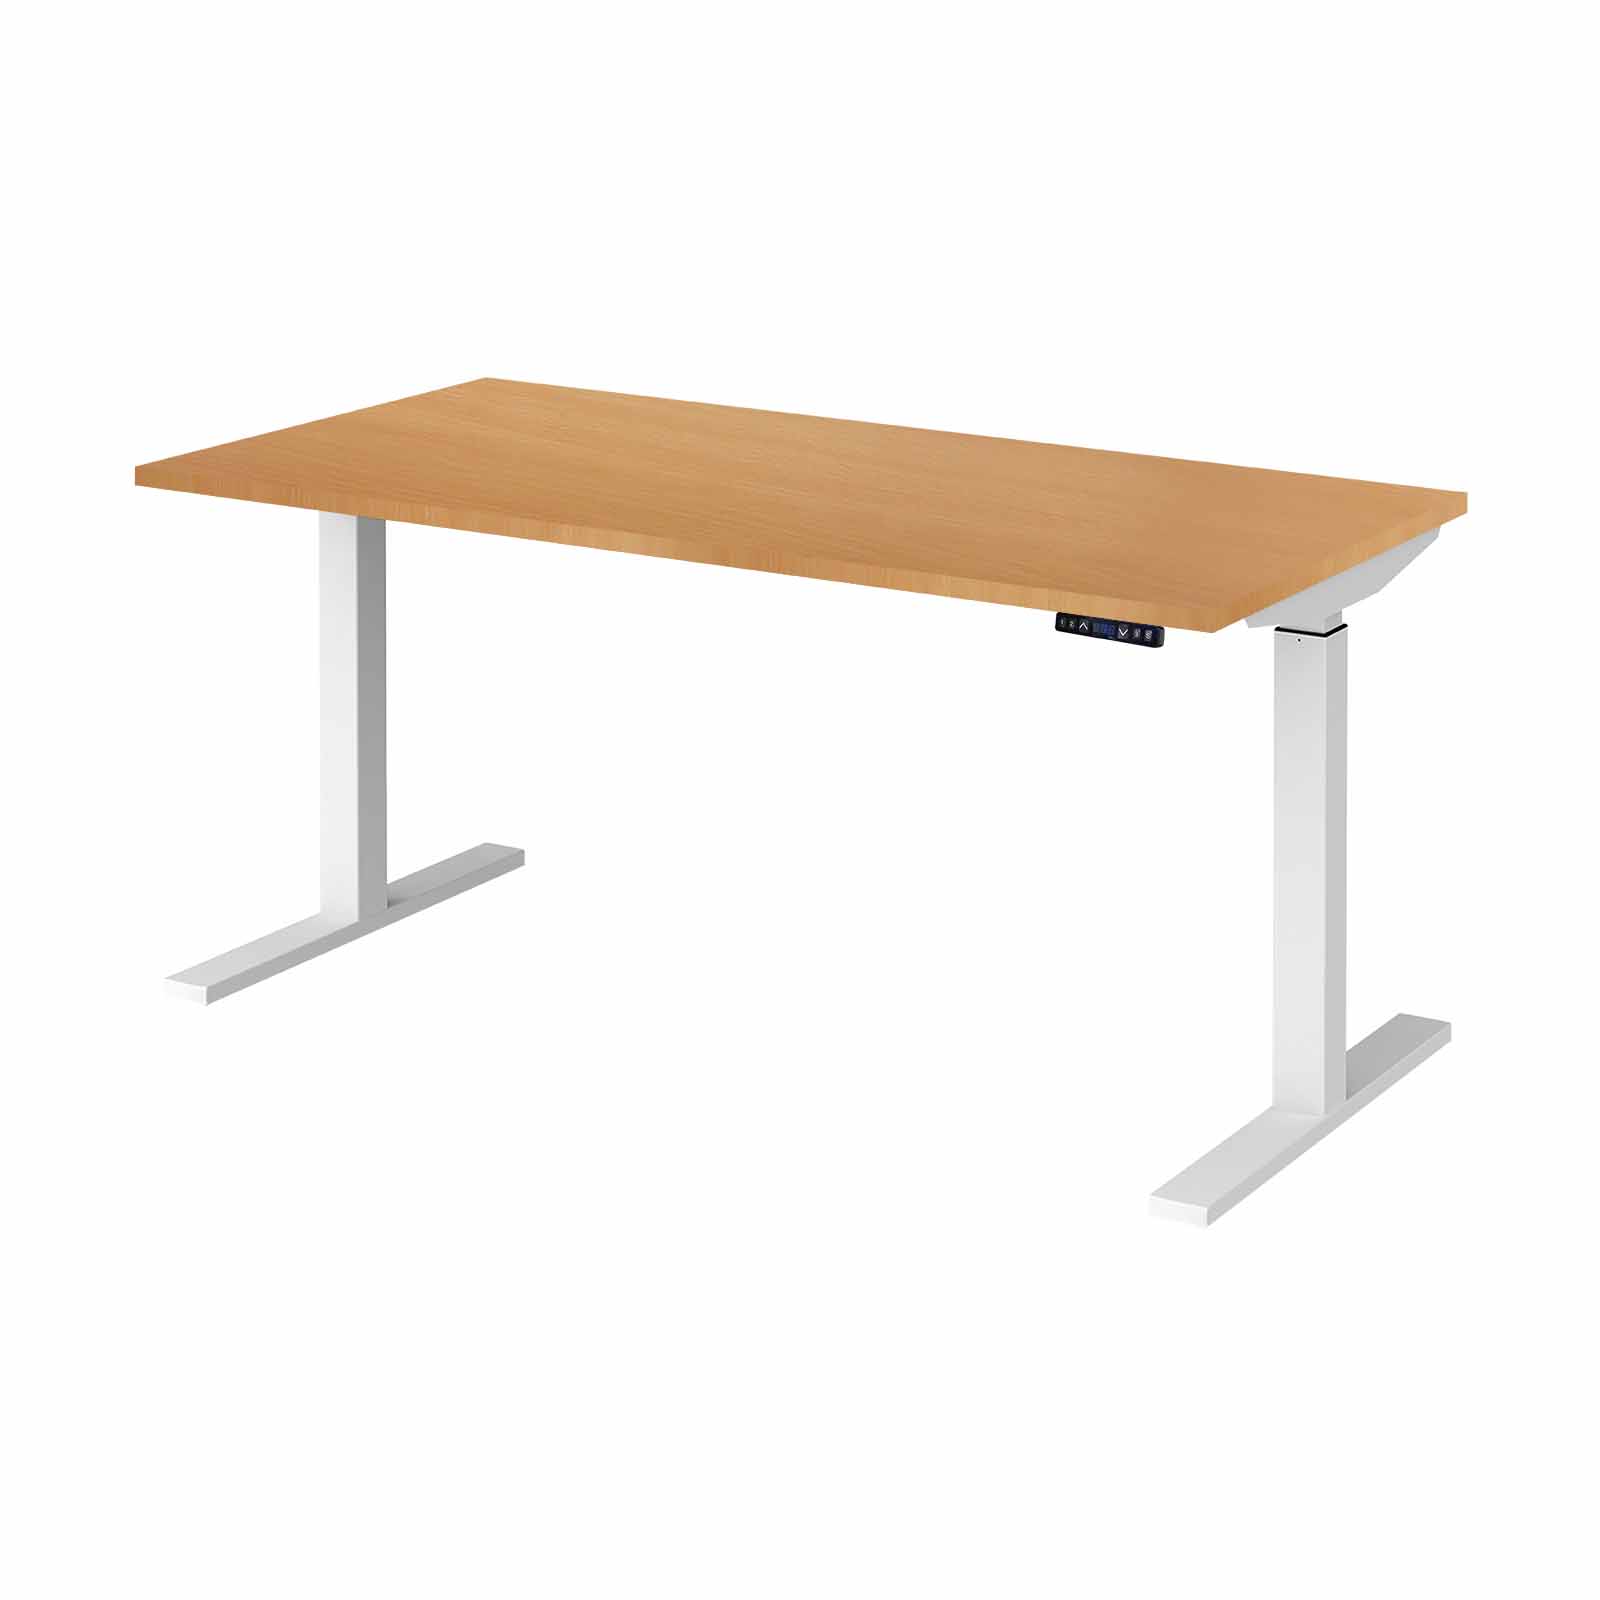 MADE TO ORDER Single Person - Aspire Sit/stand Desk